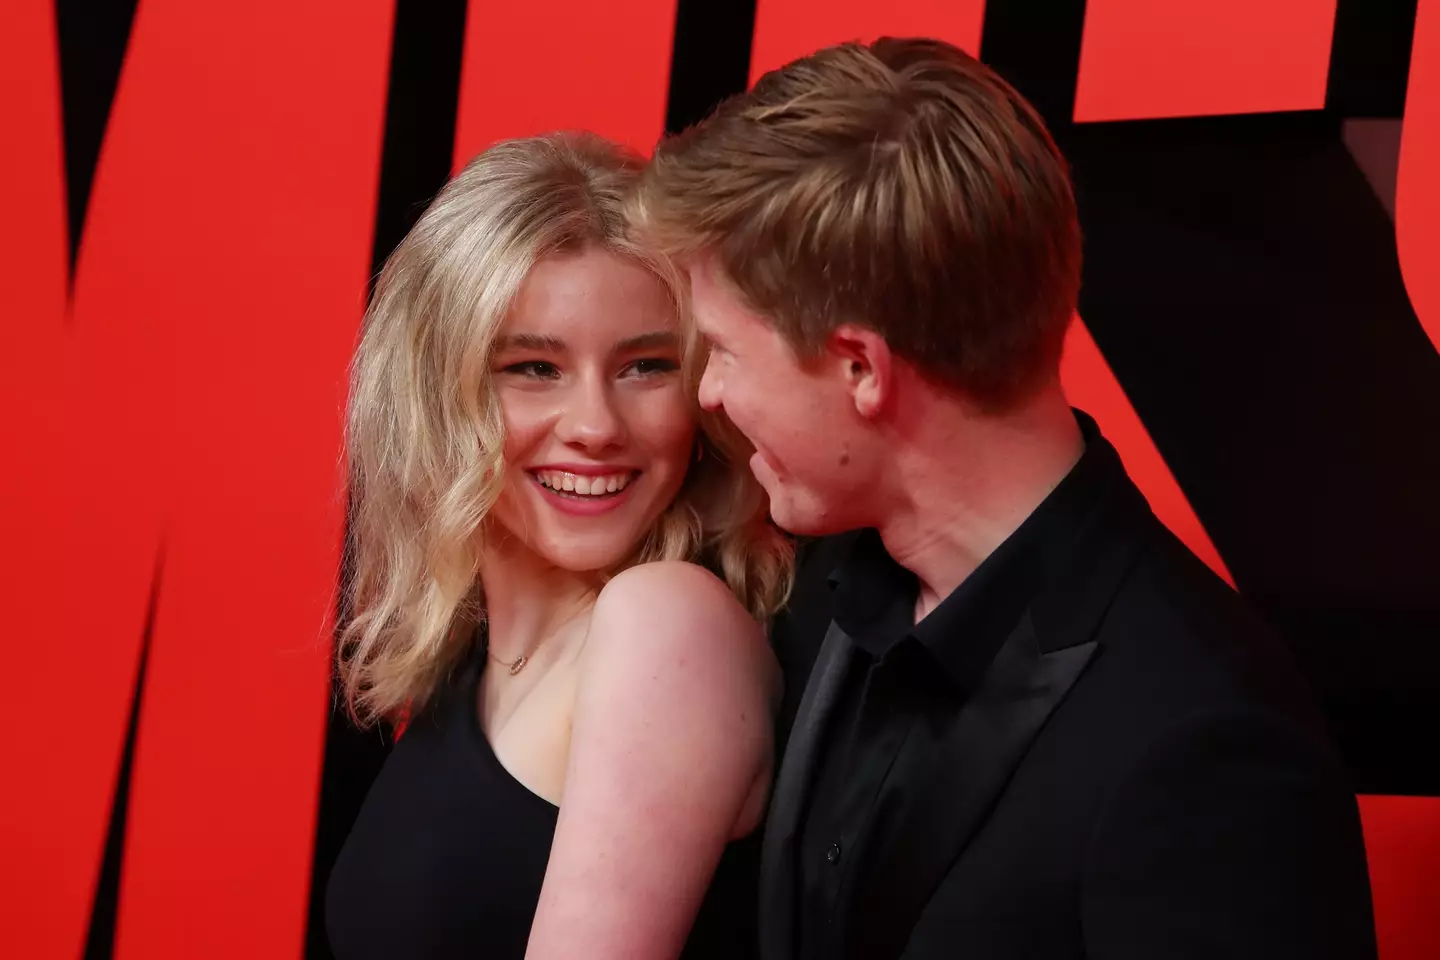 It was the couple's first red carpet together.